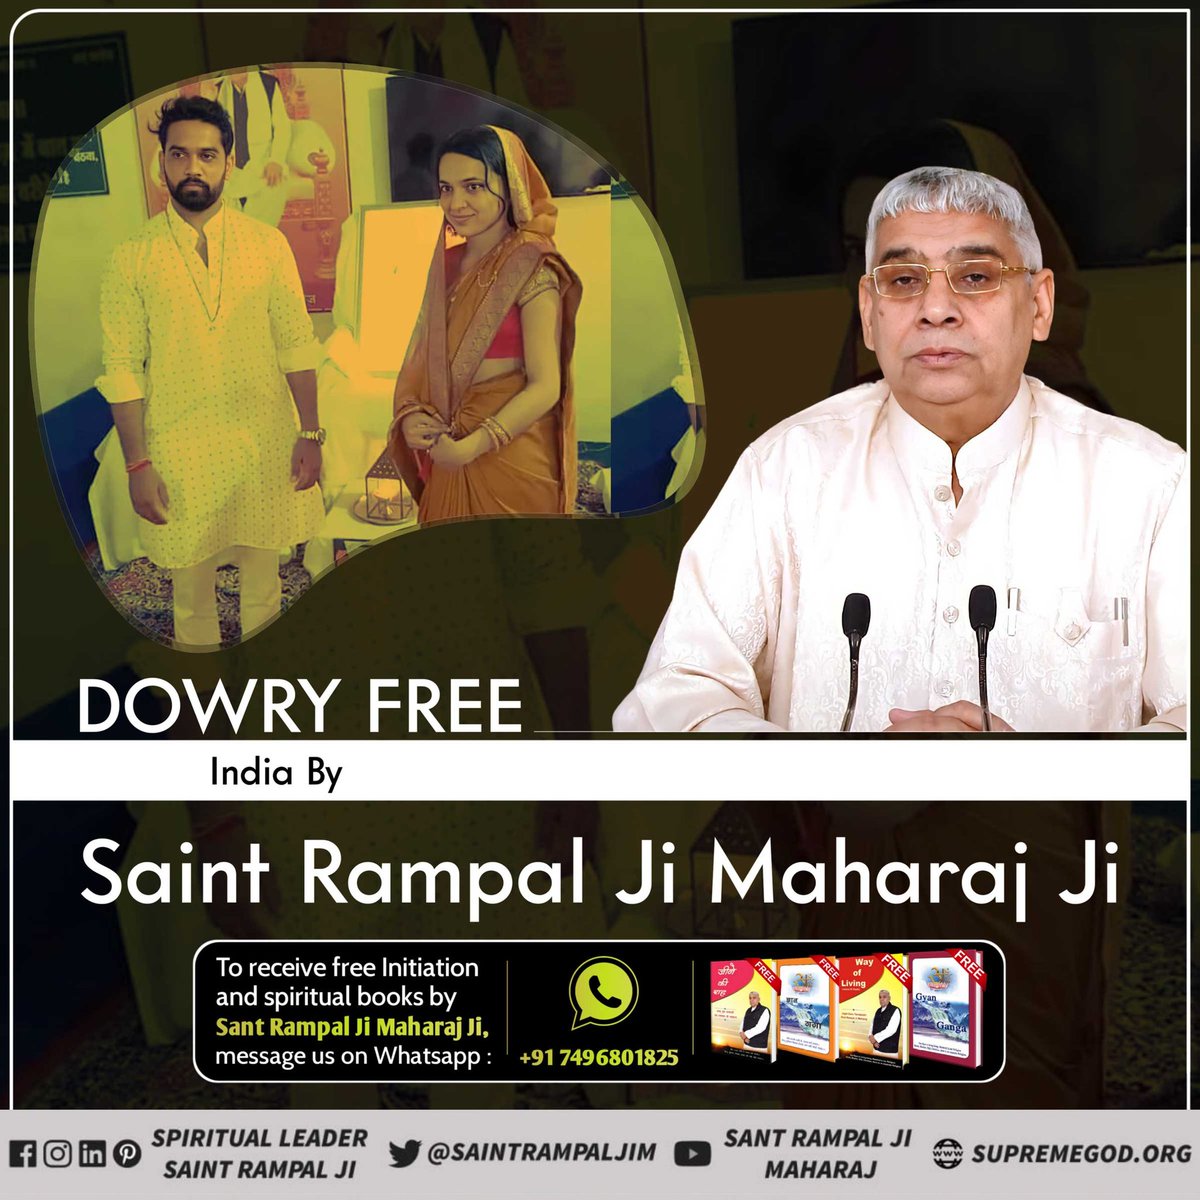 #दहेज_दानव_का_अंत_हो
Sant Rampal Ji Maharaj has demonstrated a spectacular dowry free marriage initiative called Ramaini that doesn’t accept any exchange of dowry.
#GodMorningSaturday